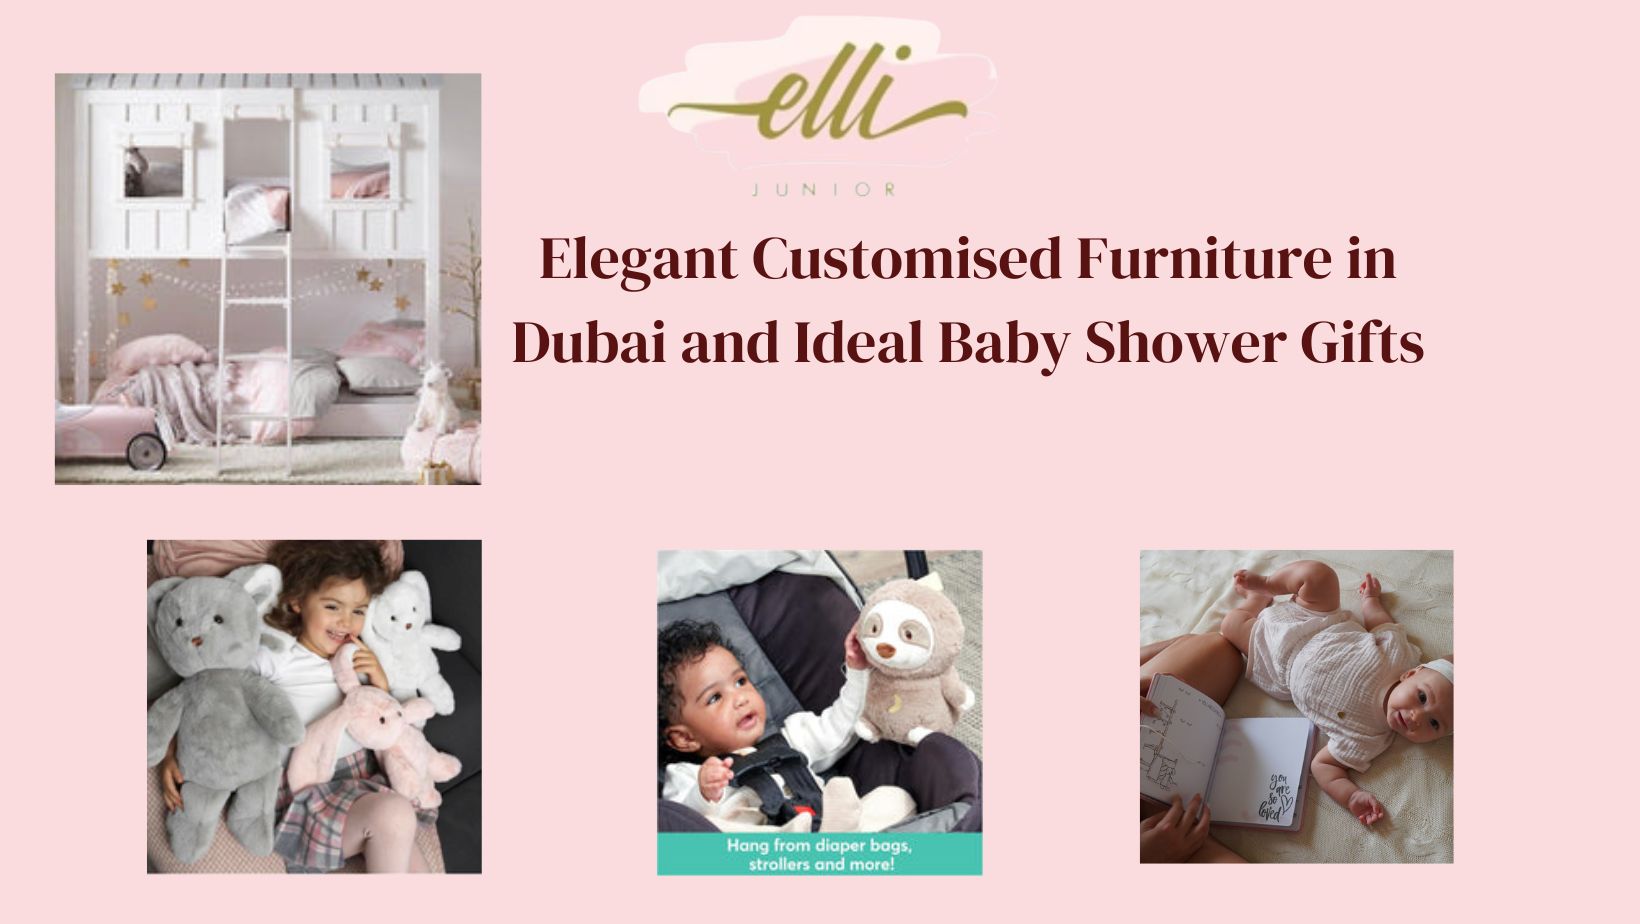 The Best of Customized Furniture and Baby Shower Gifts in Dubai | TechPlanet